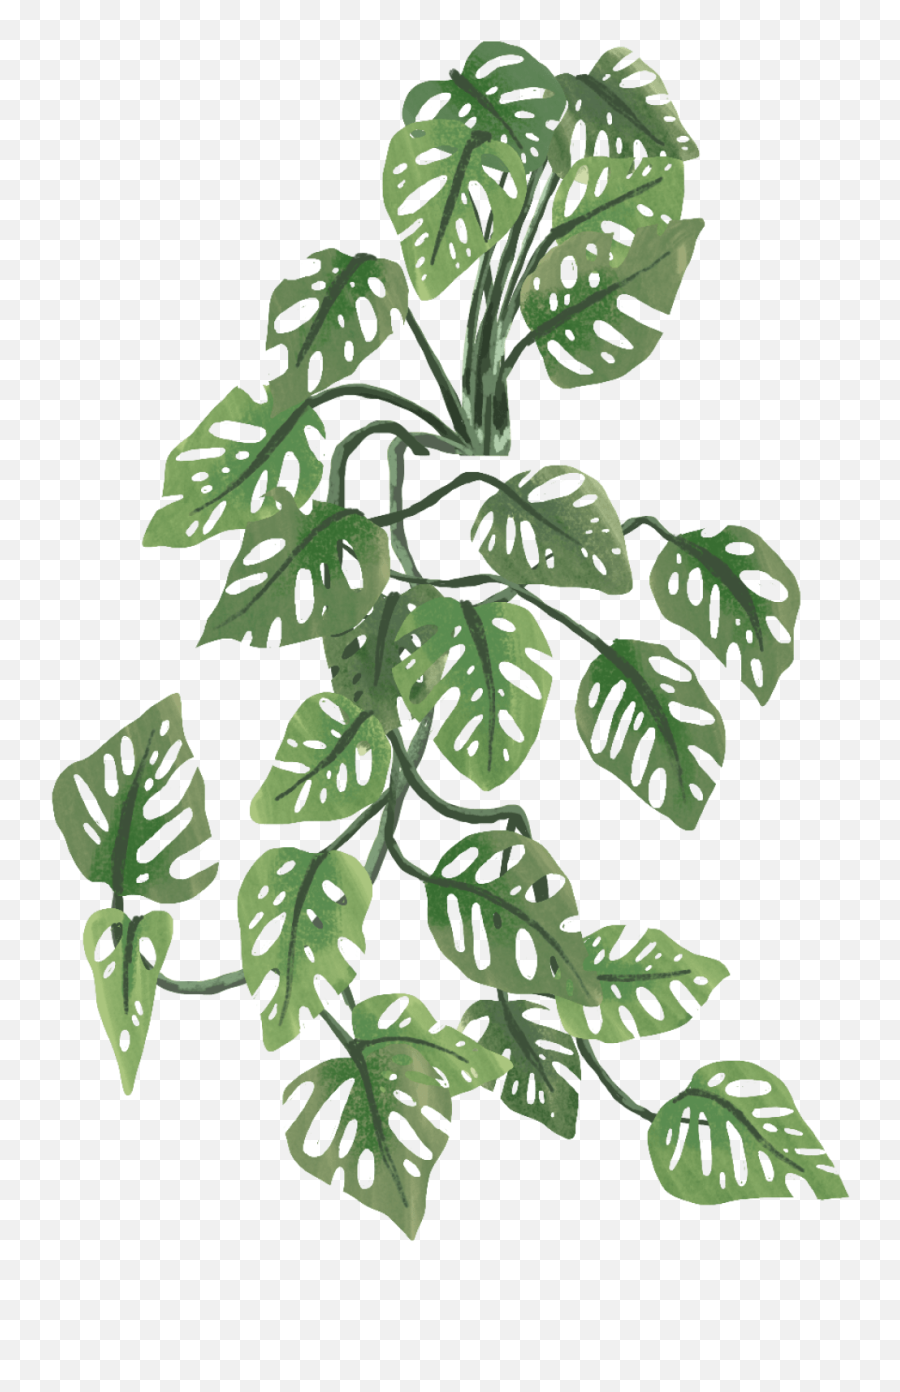 How Many Plants - Indoor And House Plant Resource Monstera Adansonii Png,Plant Icon Tumblr